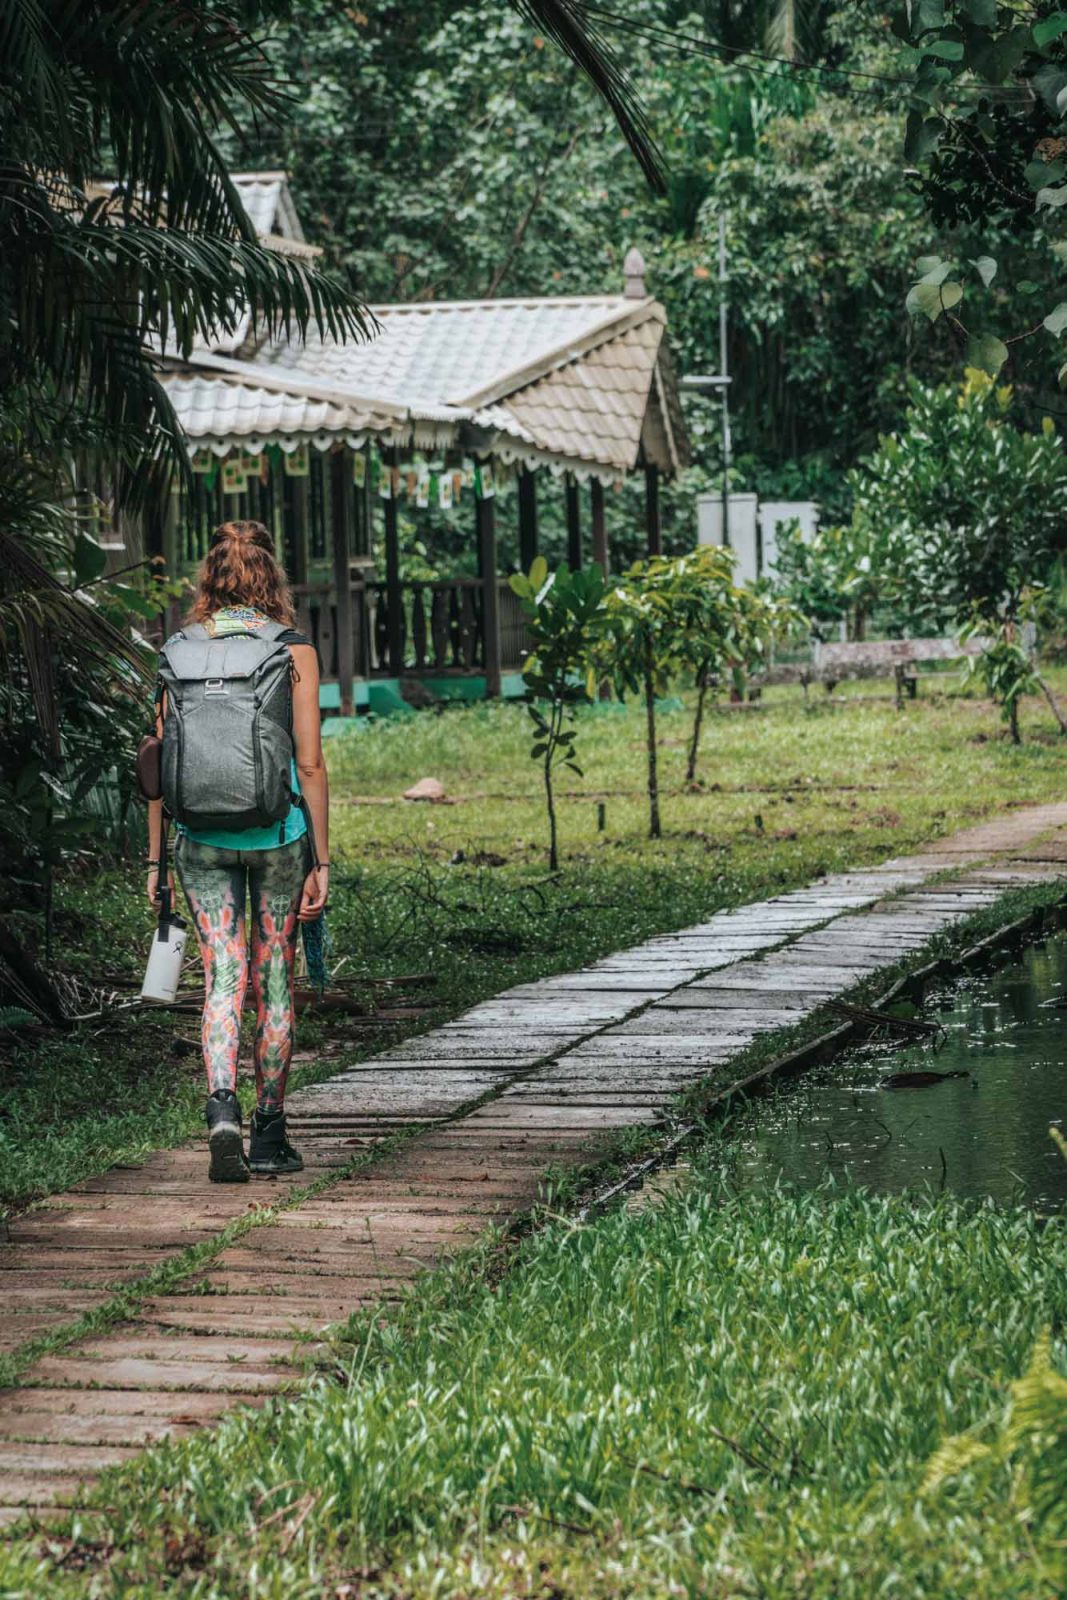 Sporting the Peak Design Everyday Backpack on our recent trip in Malaysia